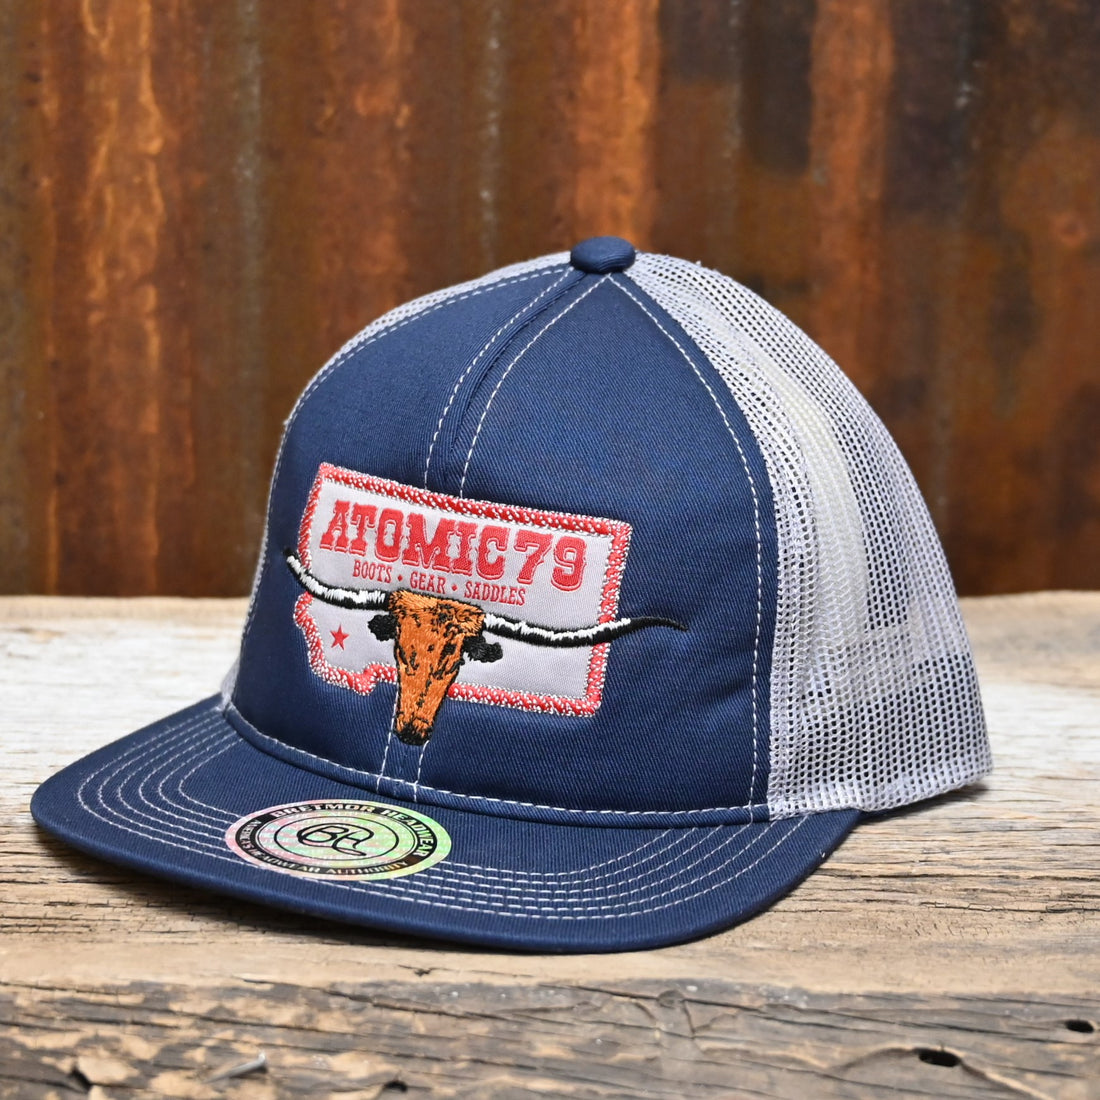 Atomic 79 Mesh Cap in Navy and Grey with Logo view of hat